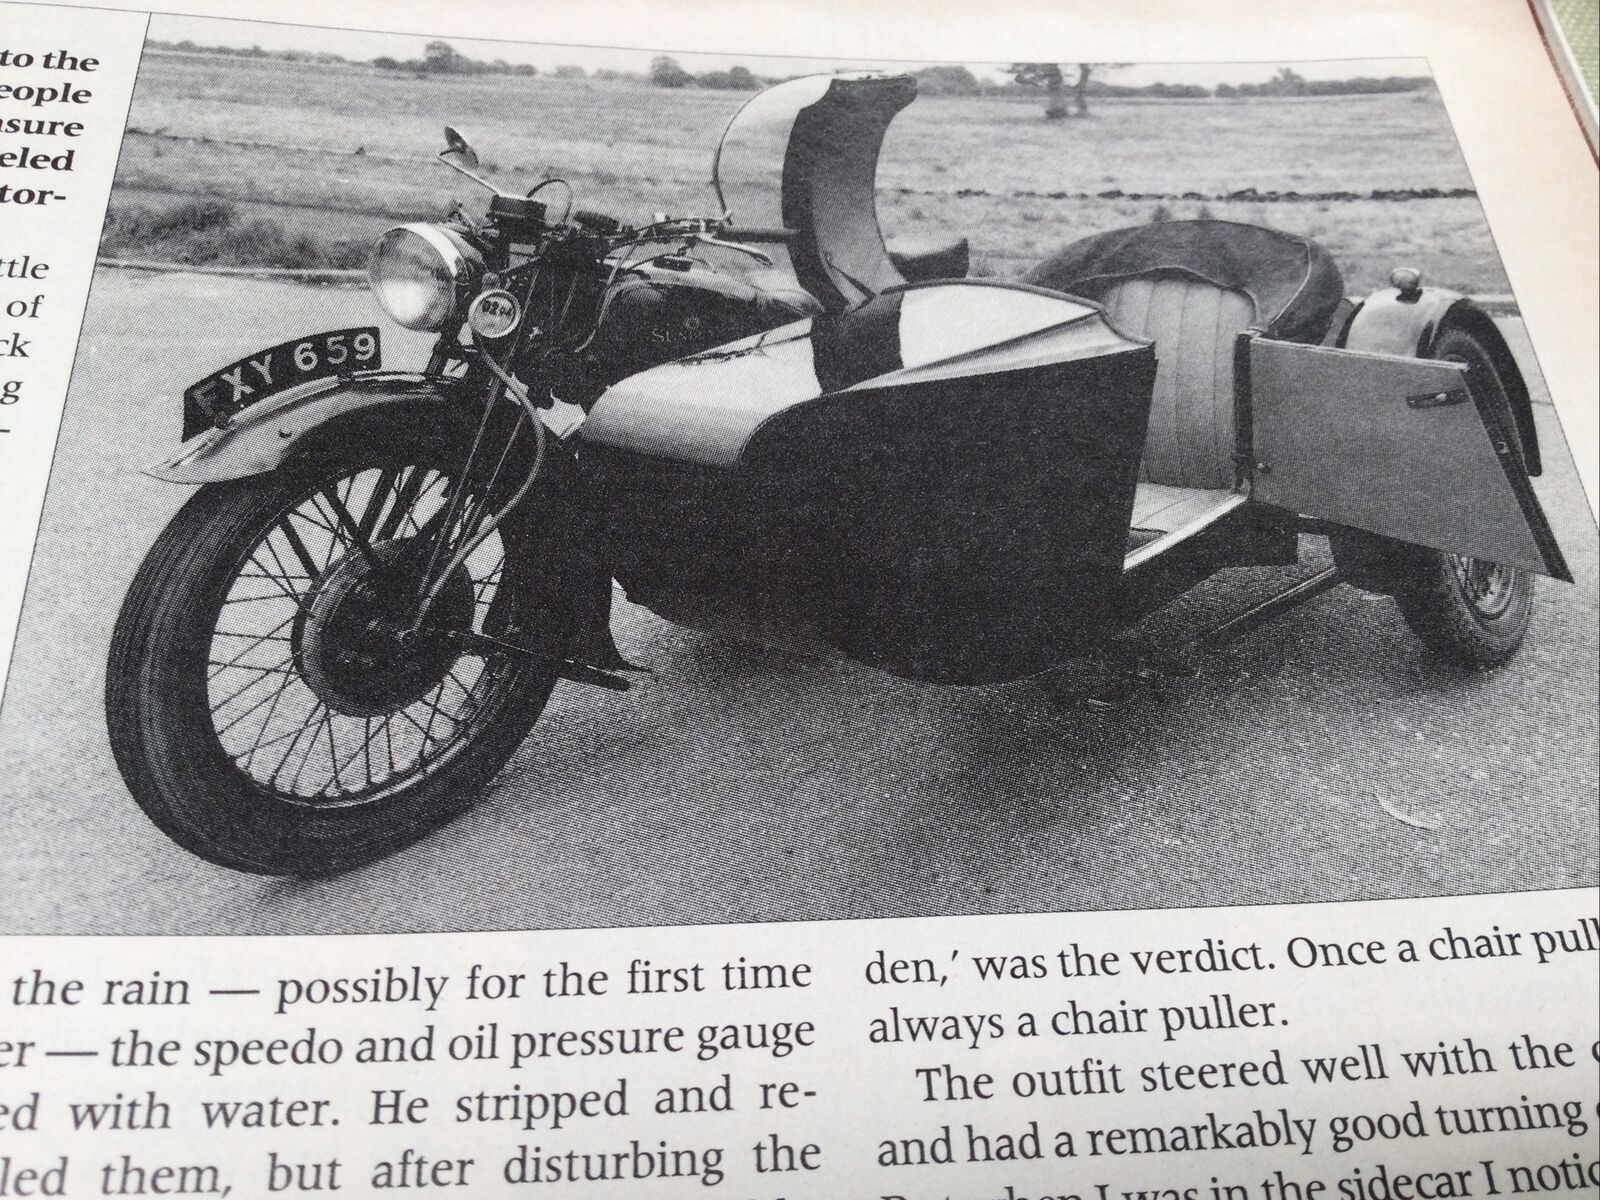 SUNBEAM SWALLOW SIDECAR OUTFIT COMBINATION MOTORCYCLE MAGAZINE ARTICLE.